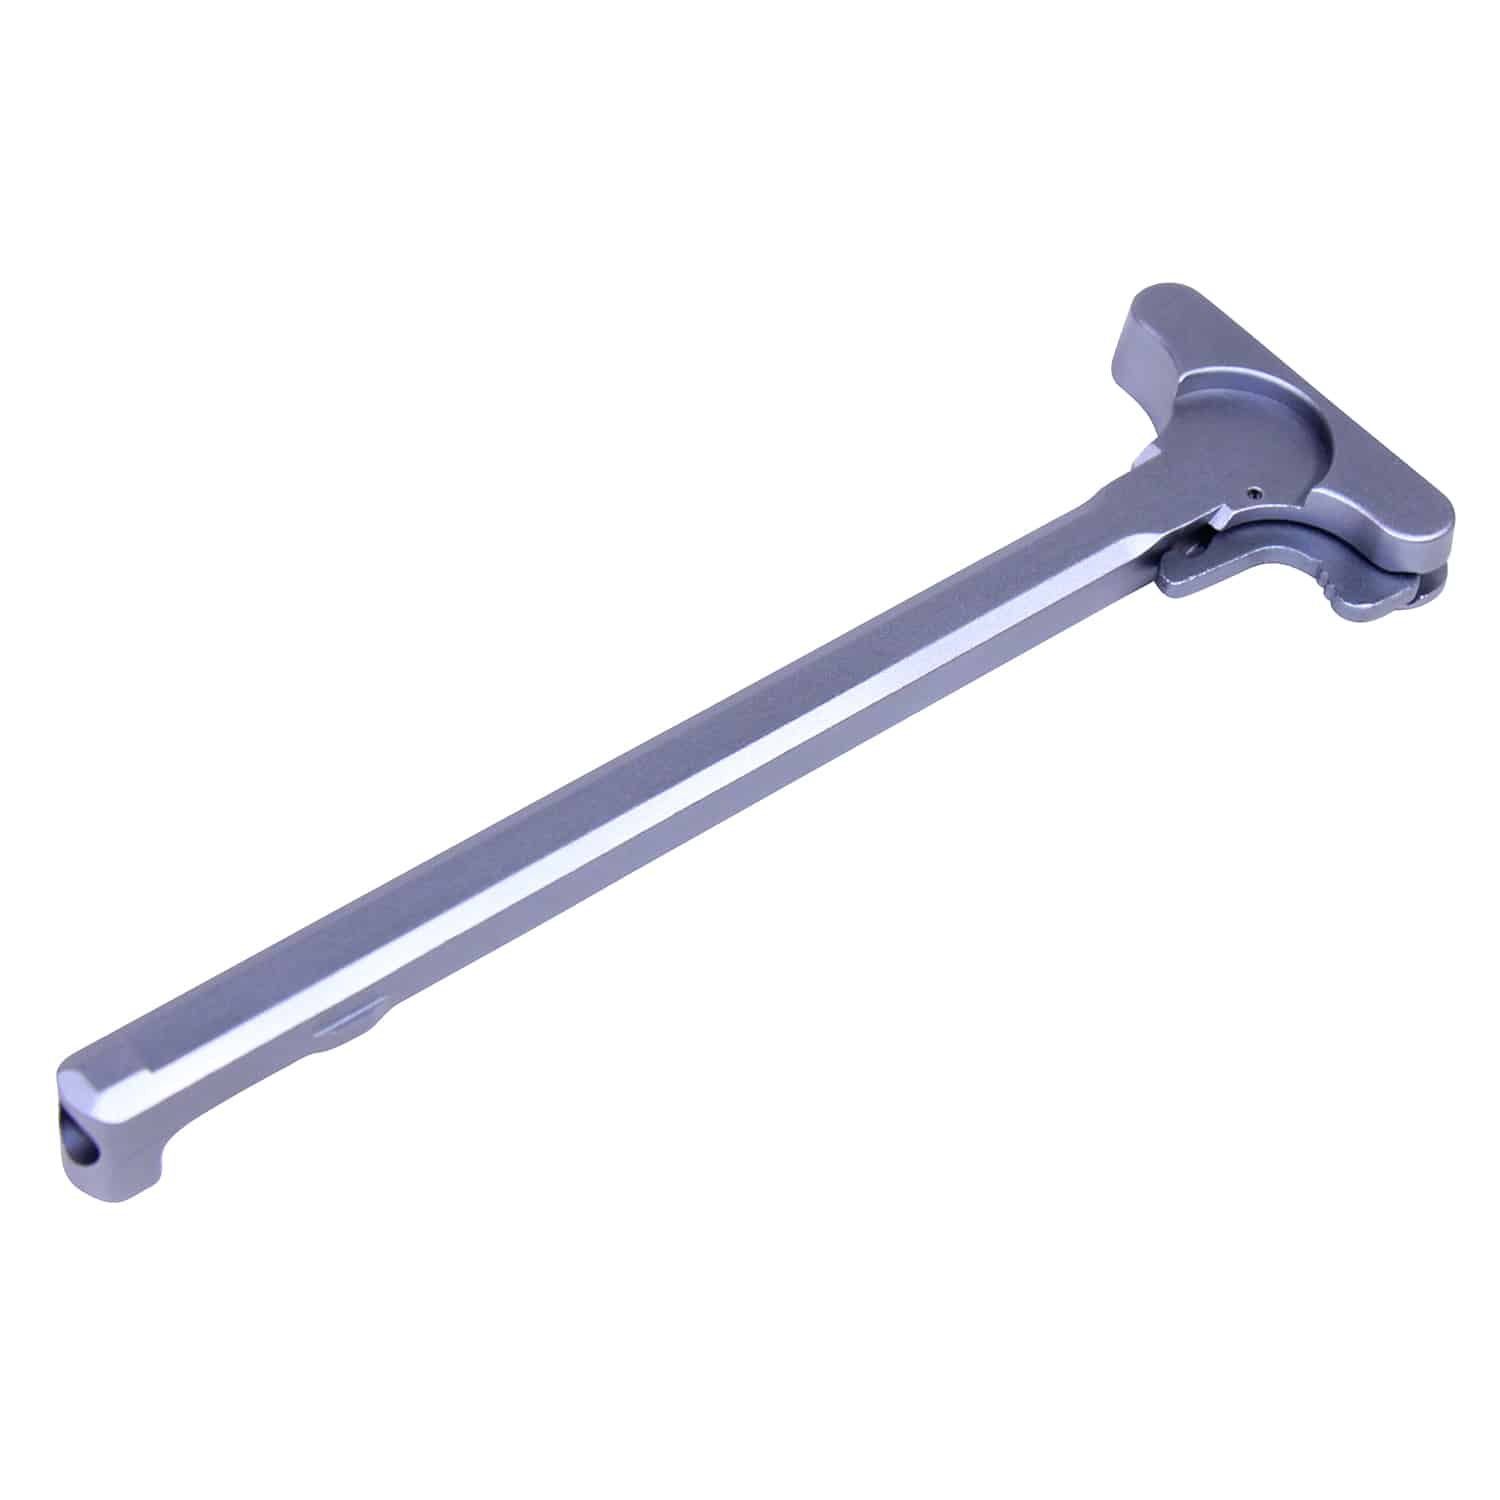 AR-15 Mil-Spec Charging Handle in Anodized Grey